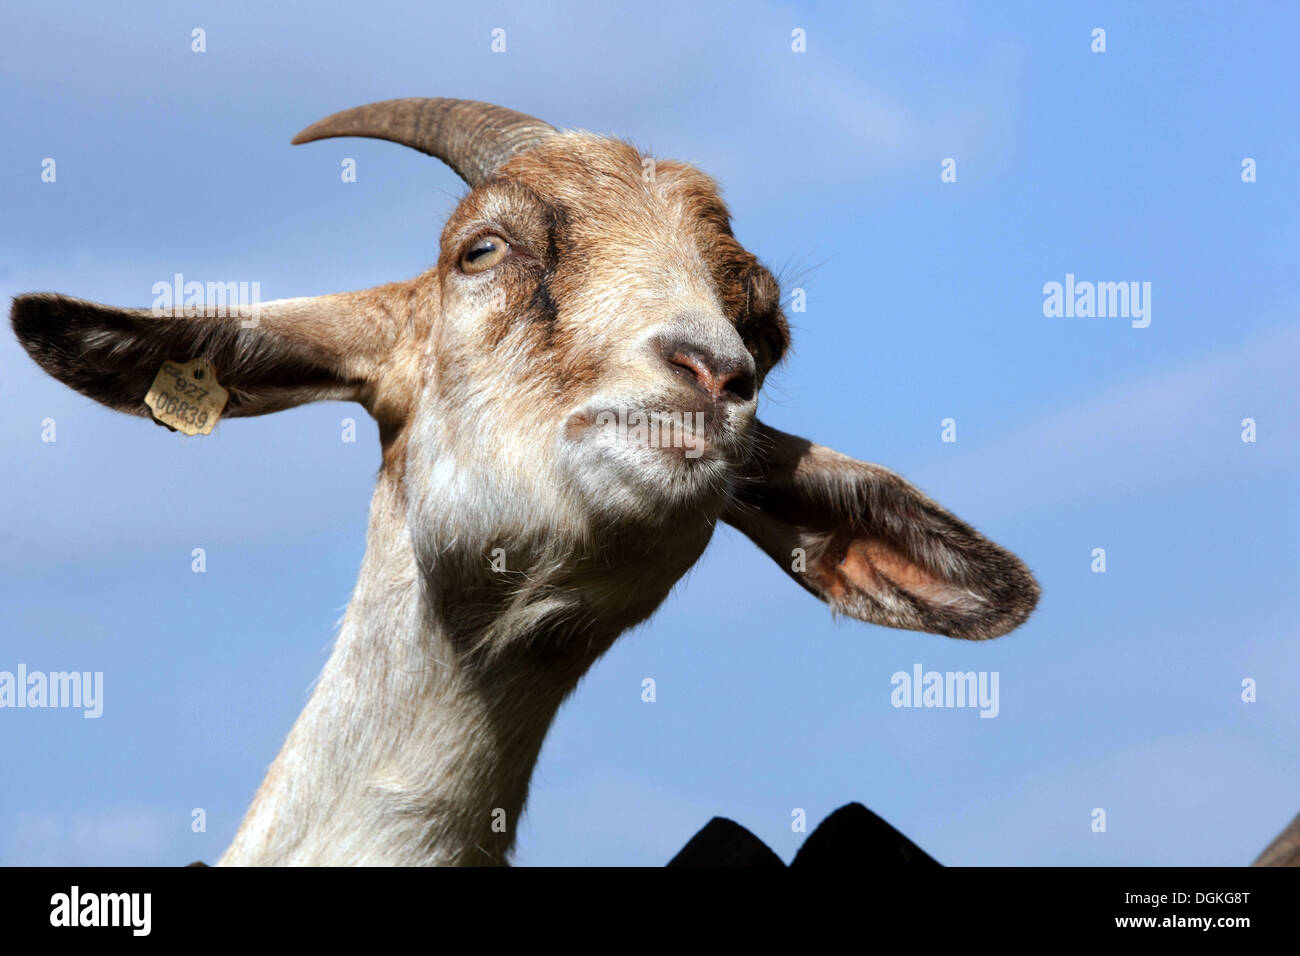 Goat head, ears horns front view Stock Photo